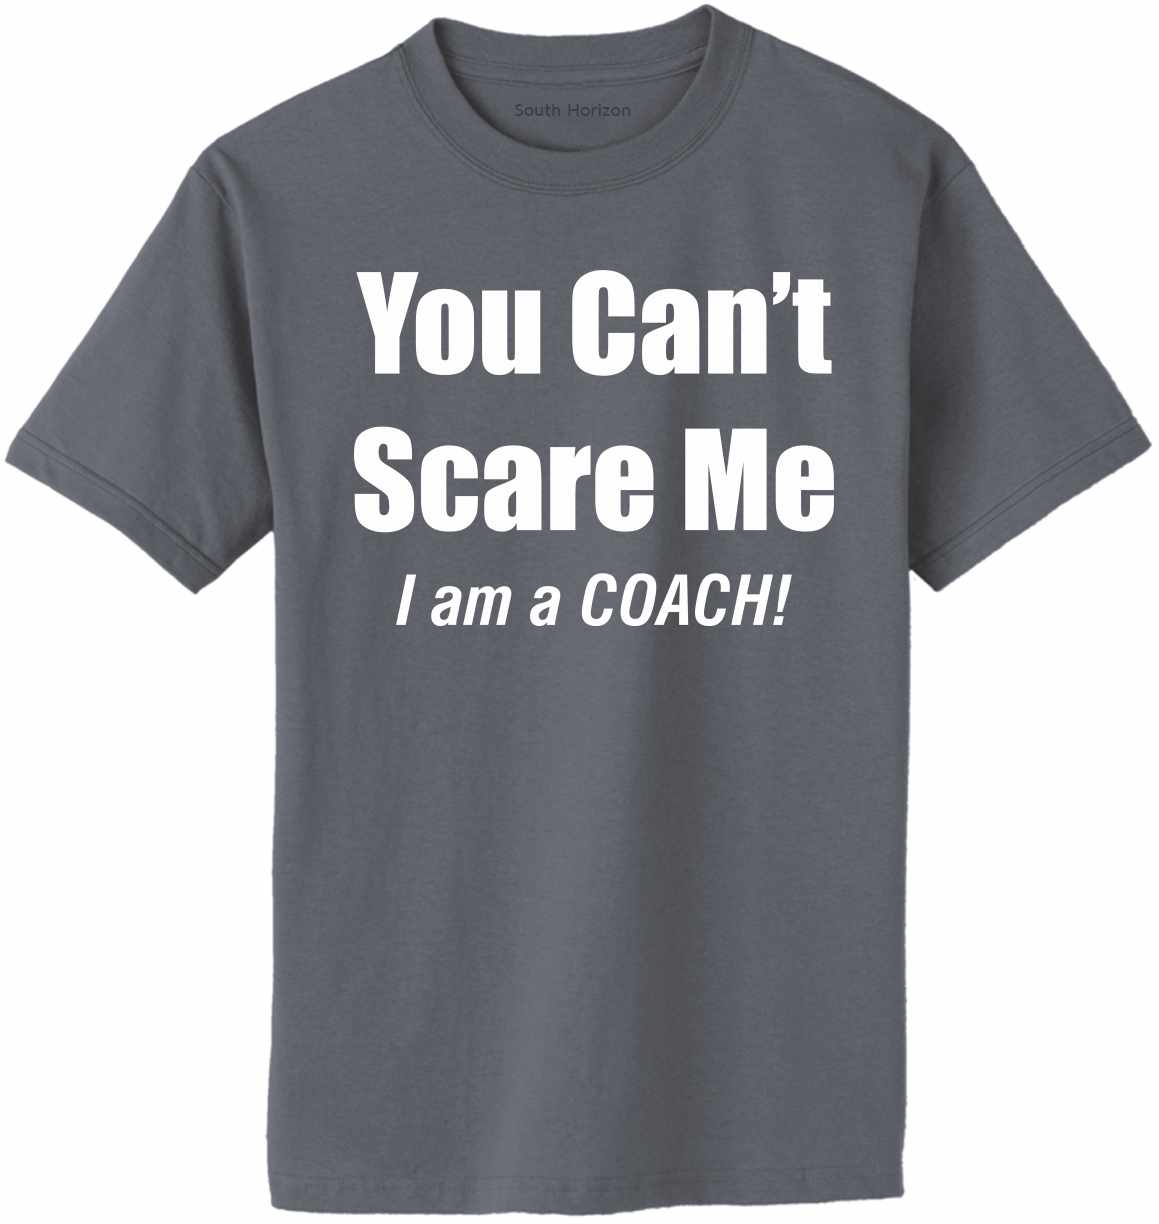 You Can't Scare Me, I'm a COACH Adult T-Shirt (#946-1)